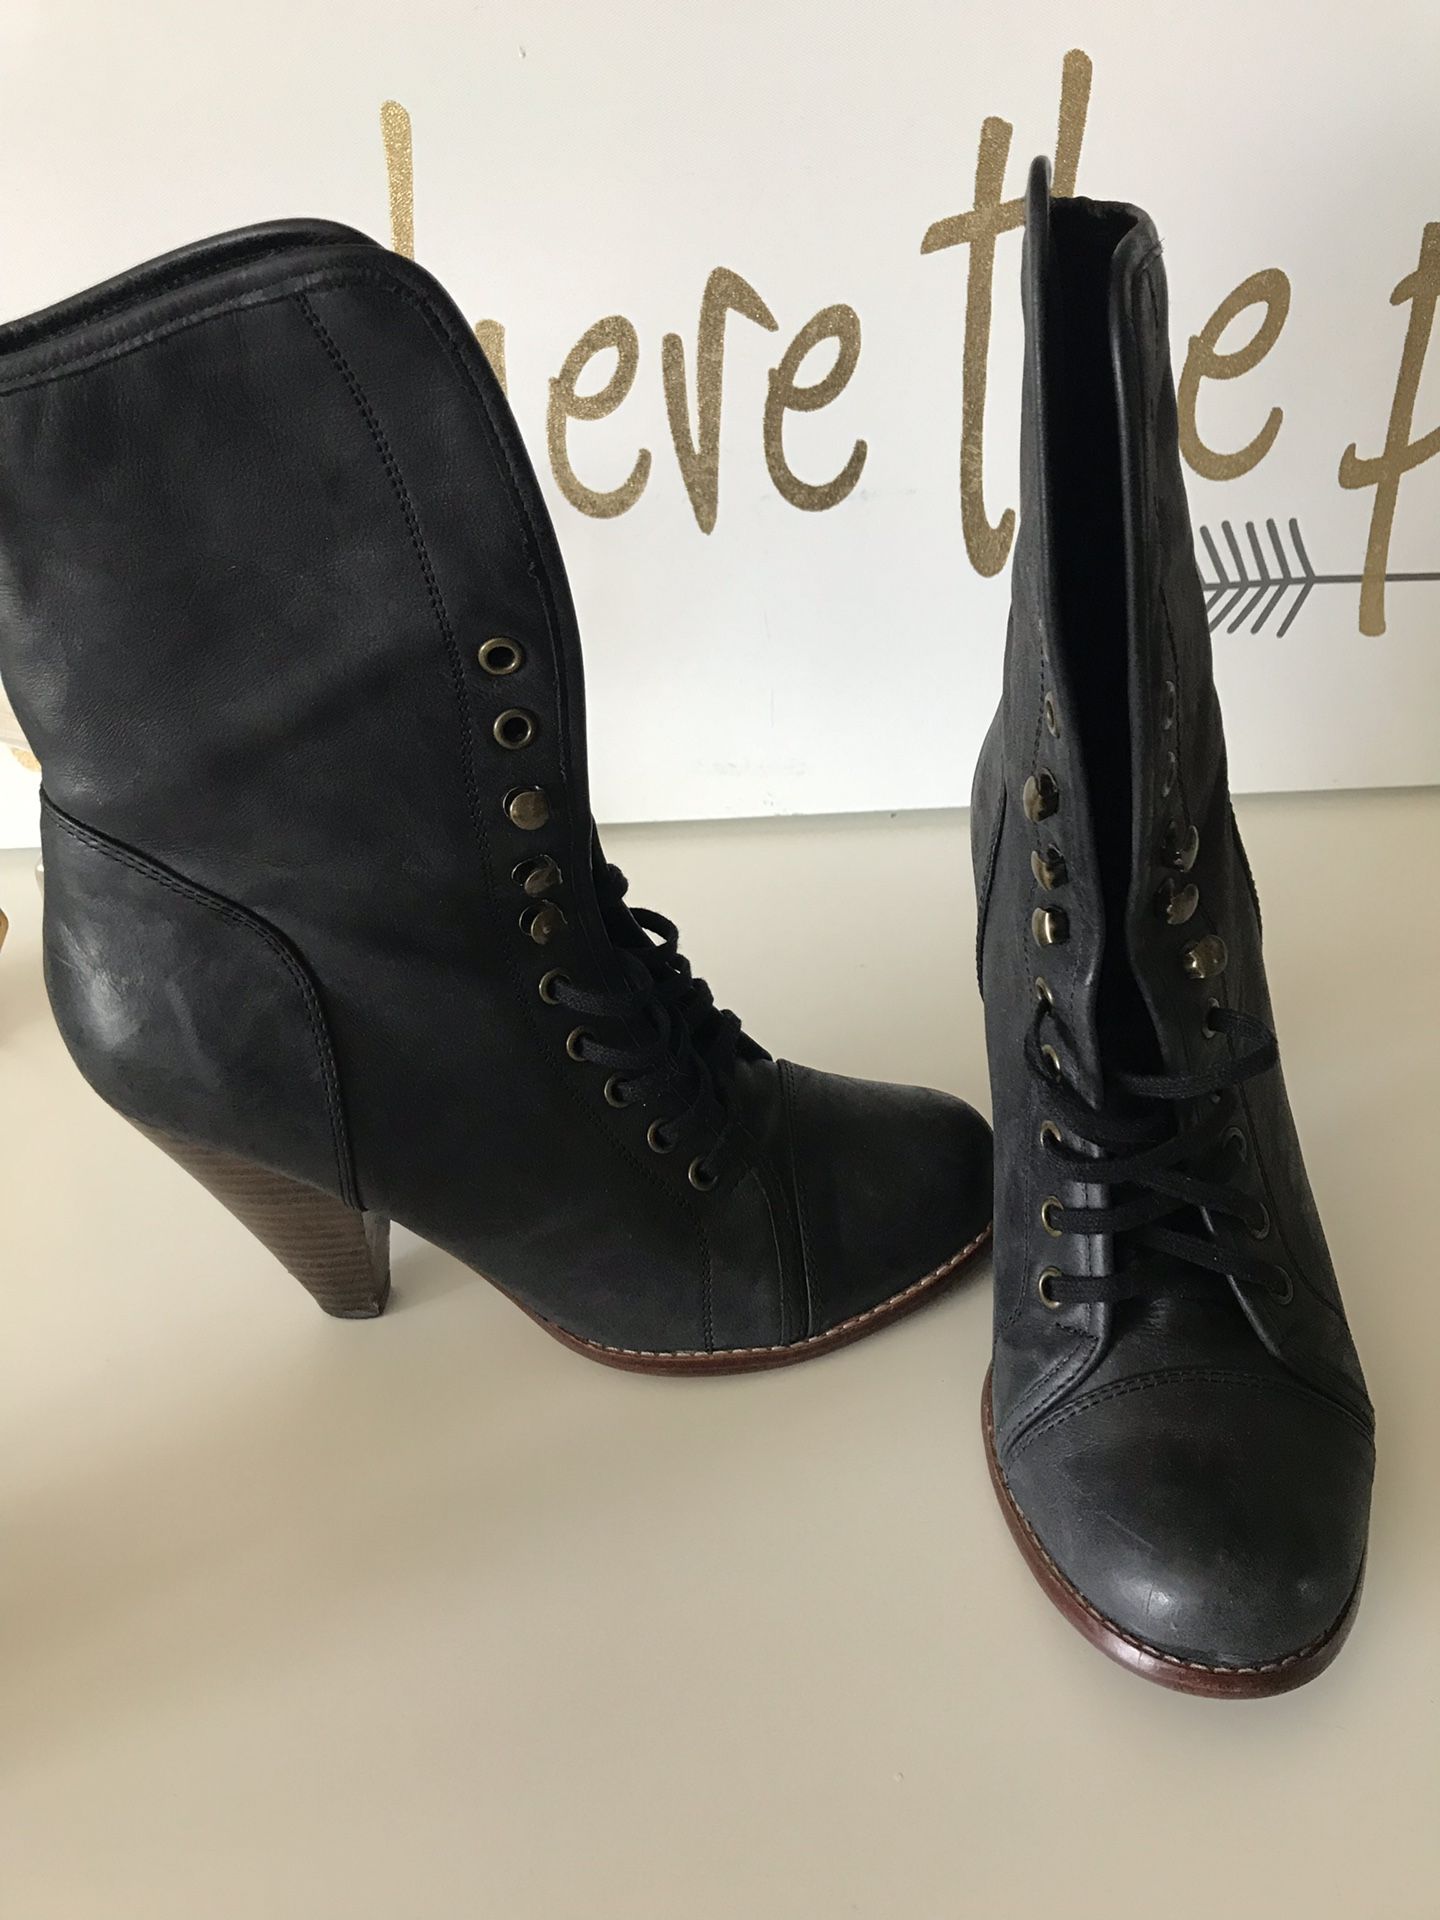 ***Genuine Leather Aldo Boots size 40 for $20*** UK 40 US 9